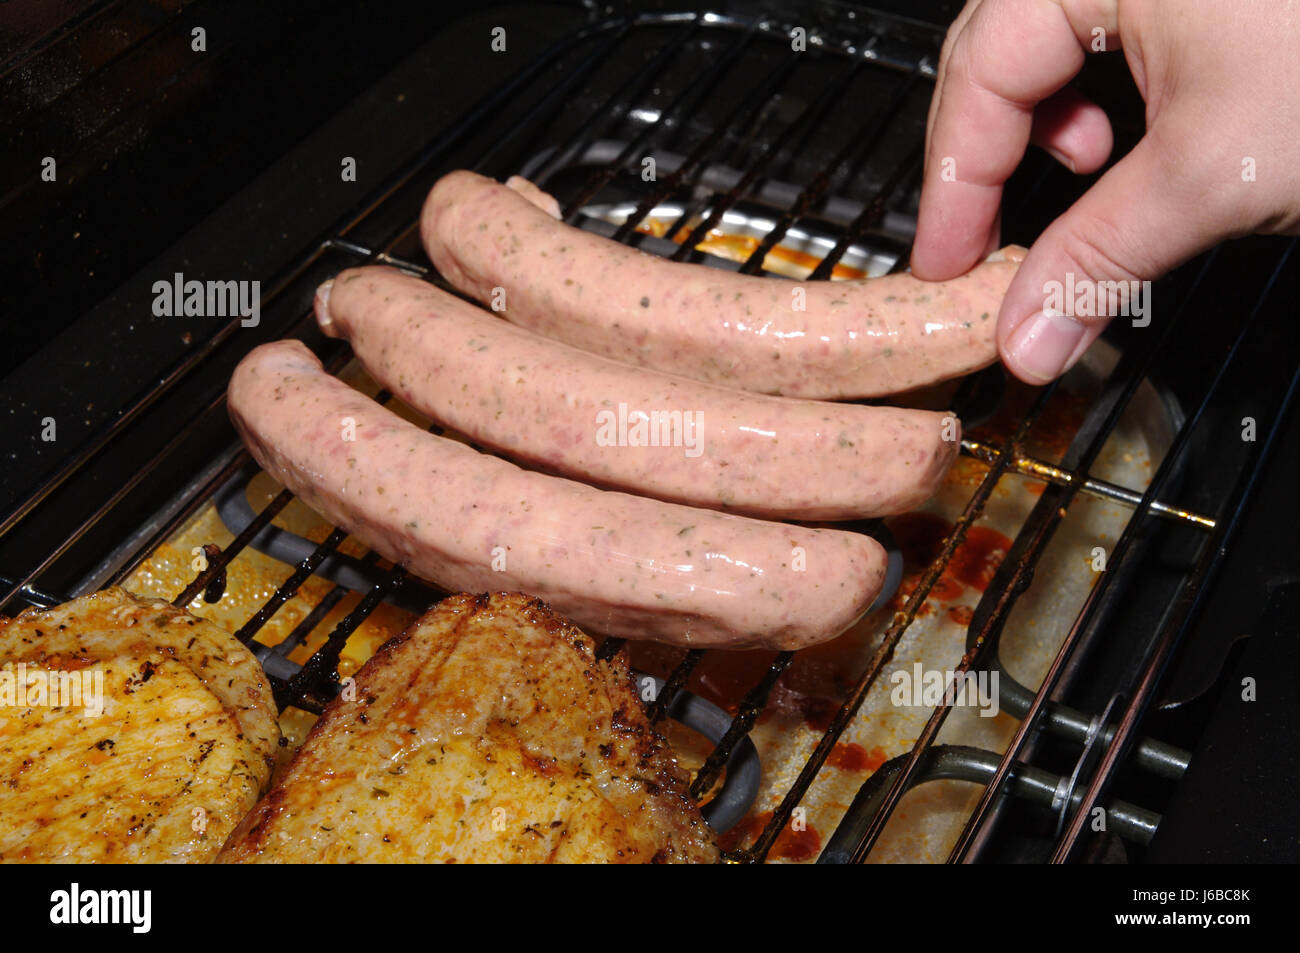 hand garden energy power electricity electric power sausage grill barbecue Stock Photo